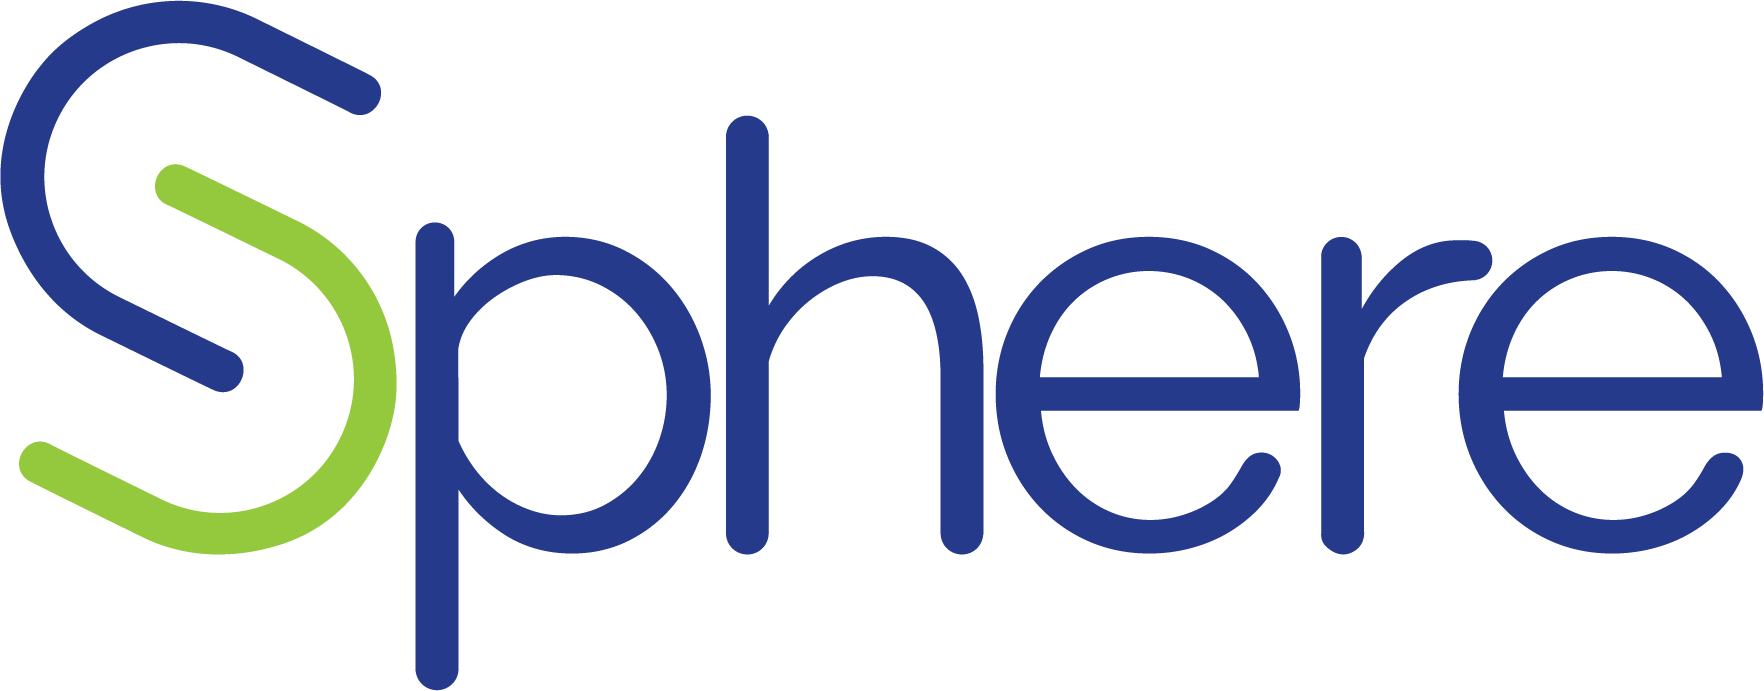 Sphere Payments